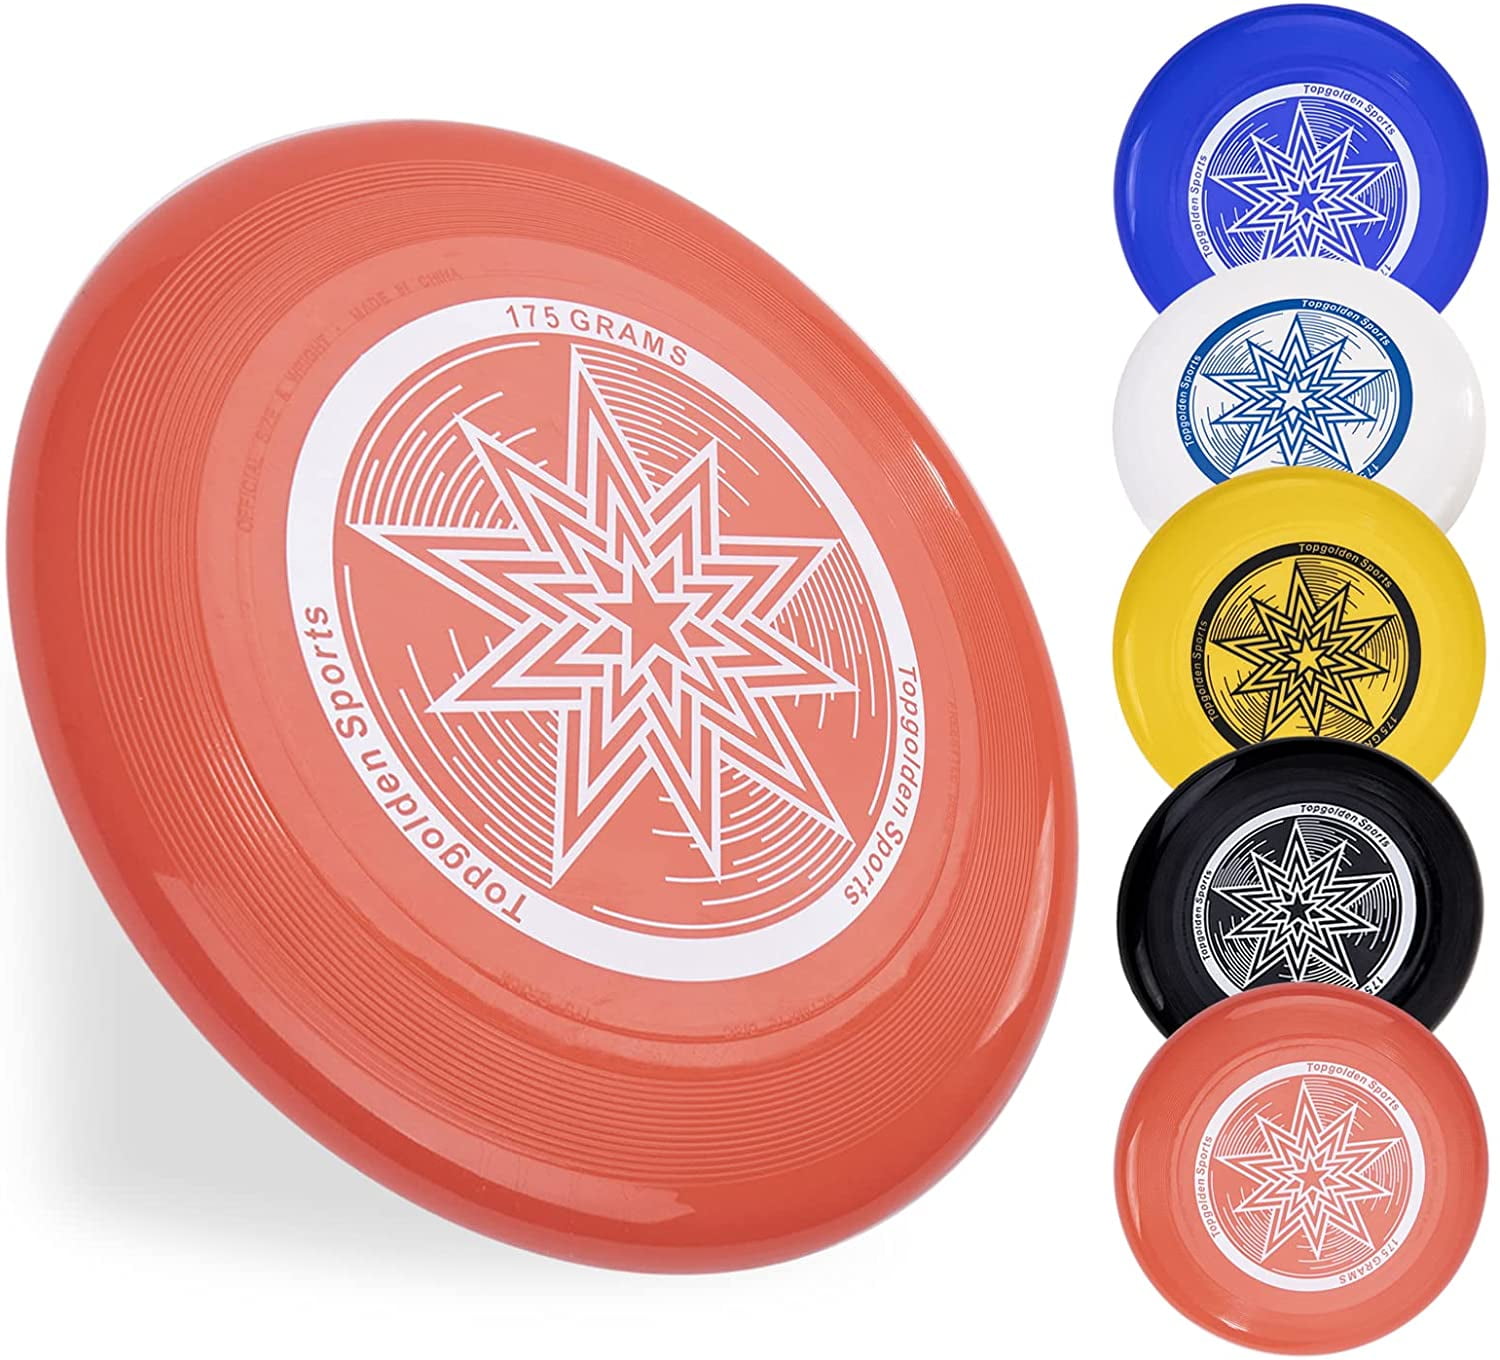 3 x Frisbee Fun Flyer Disc 70g Gram Assorted Colours Outdoor Play All Ages Game 